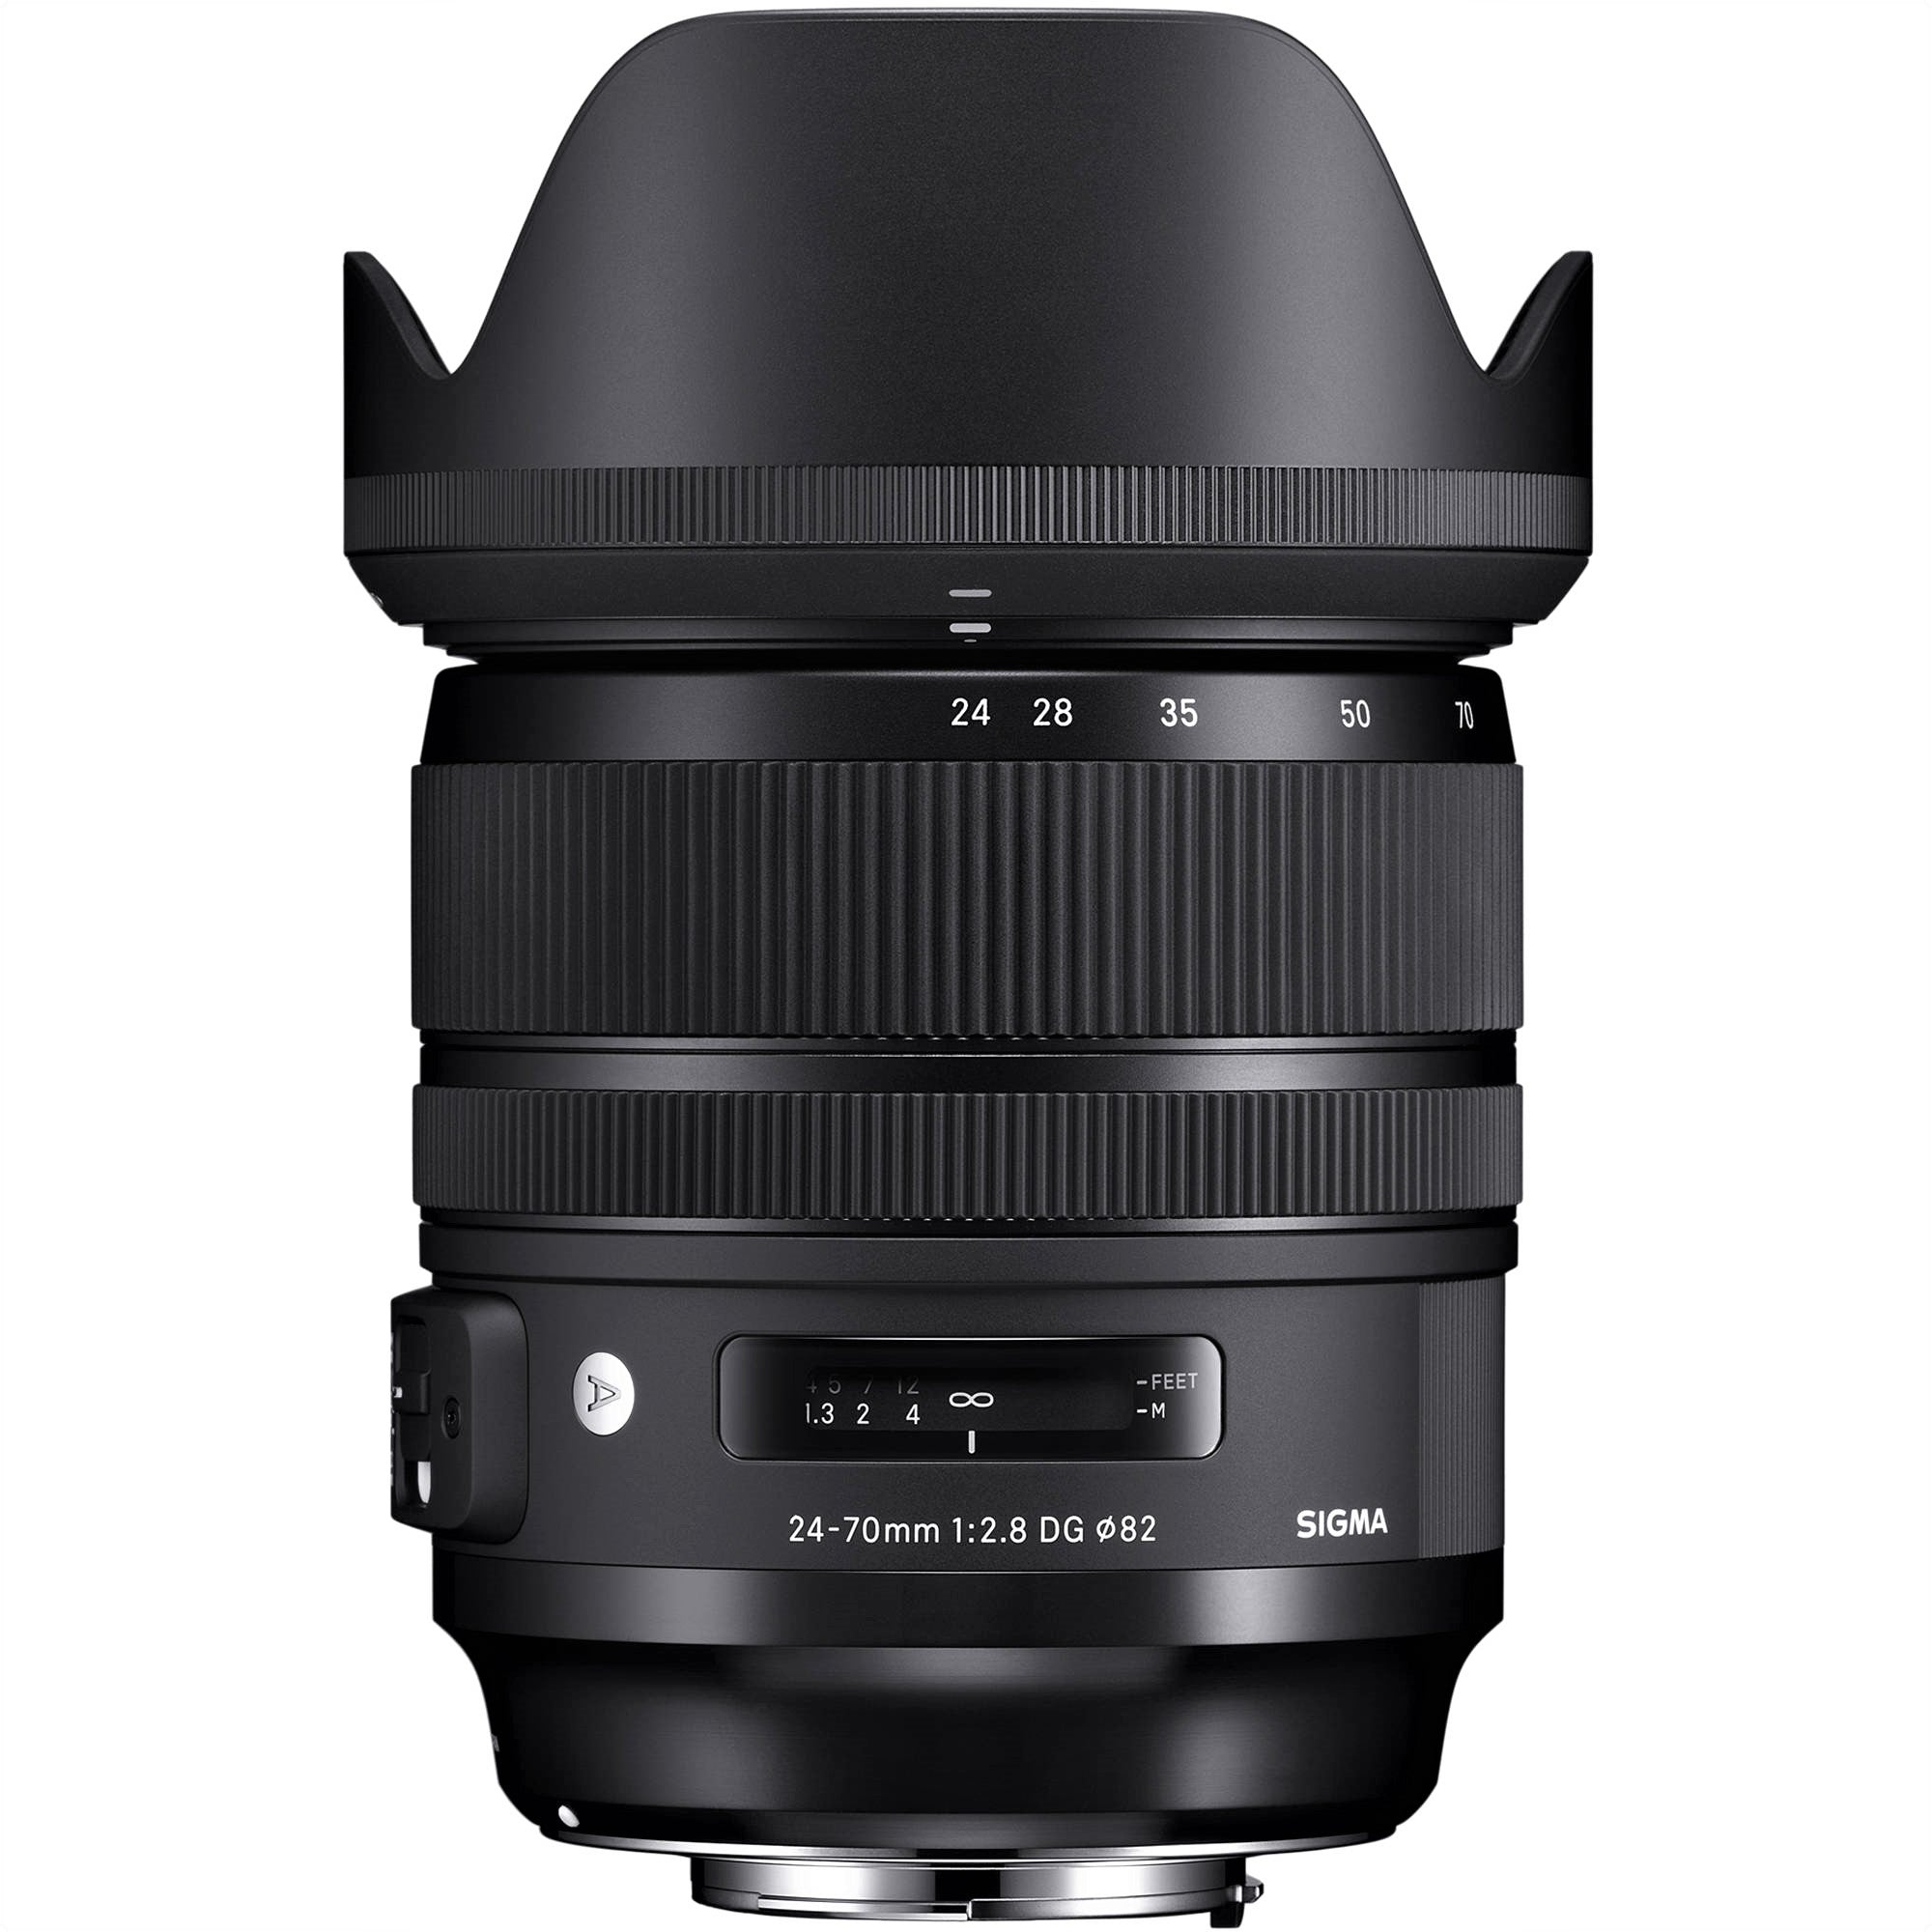 Sigma 24-70mm F2.8 DG OS HSM Art Lens for Nikon F with Attached Lens Hood on the Top